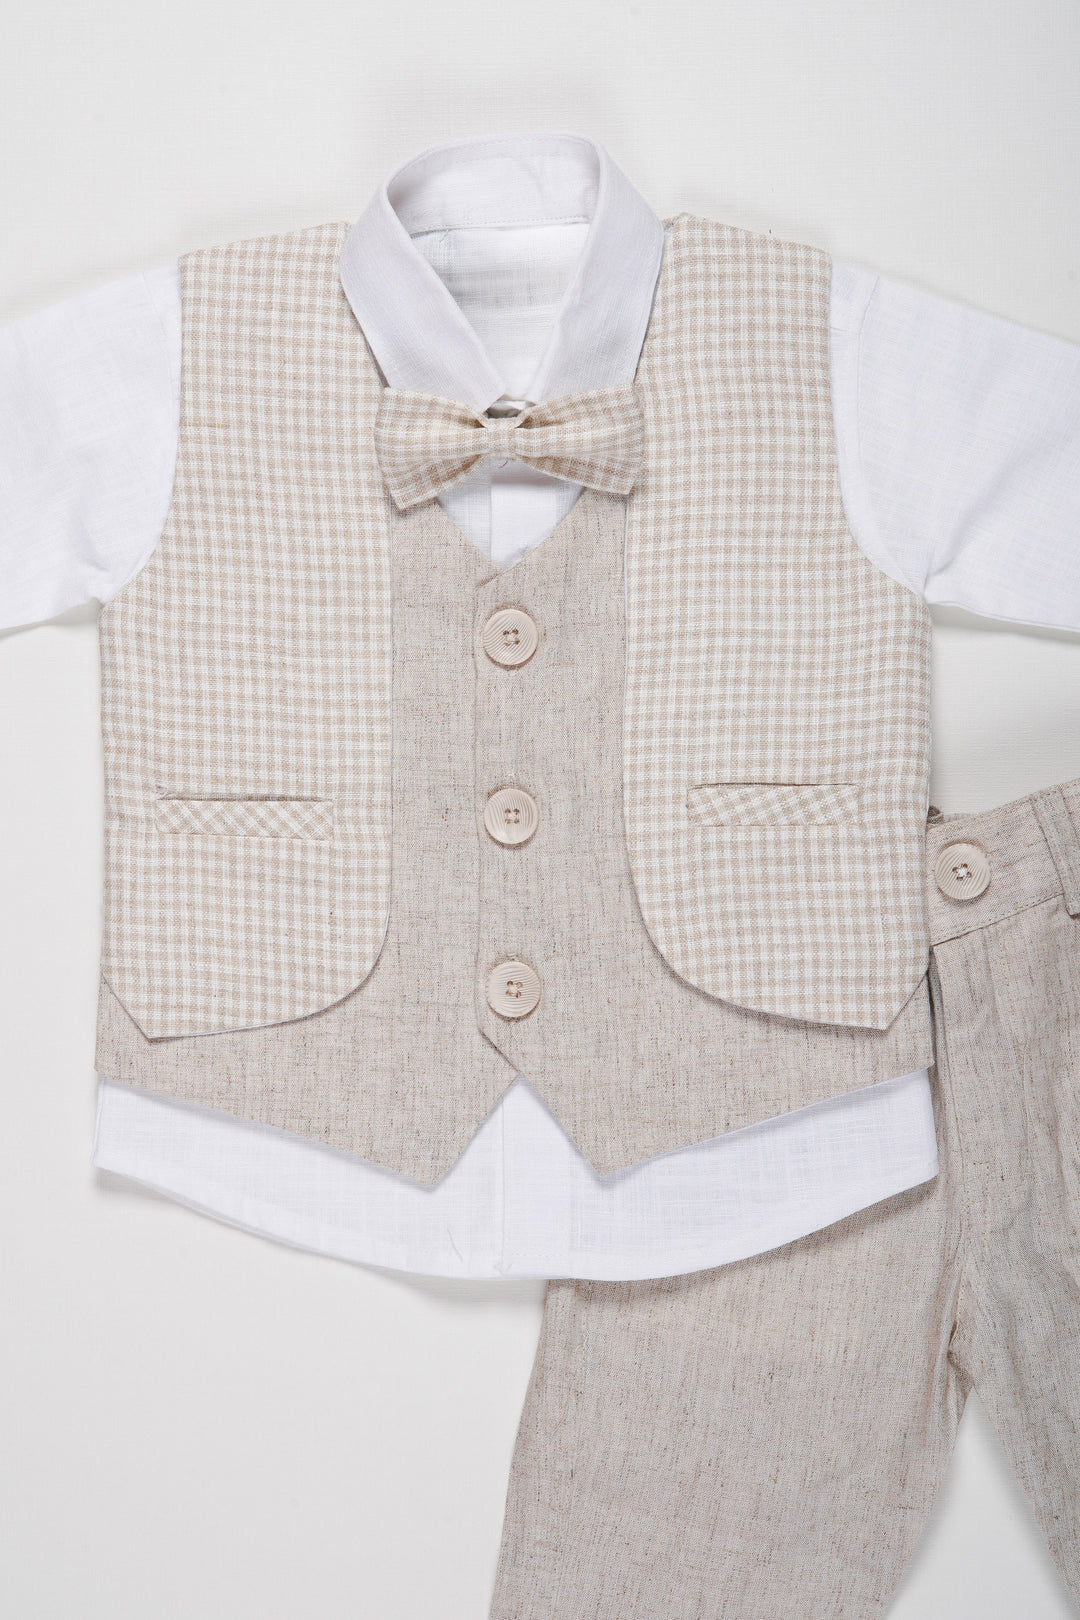 The Nesavu Boys Casual Set Boys Modern Linen Vest Suit Set with Matching Trousers and Bow Tie Nesavu Boys Linen Vest and Trousers Set | Elegant Formal Wear for Boys with Bow Tie | The Nesavu